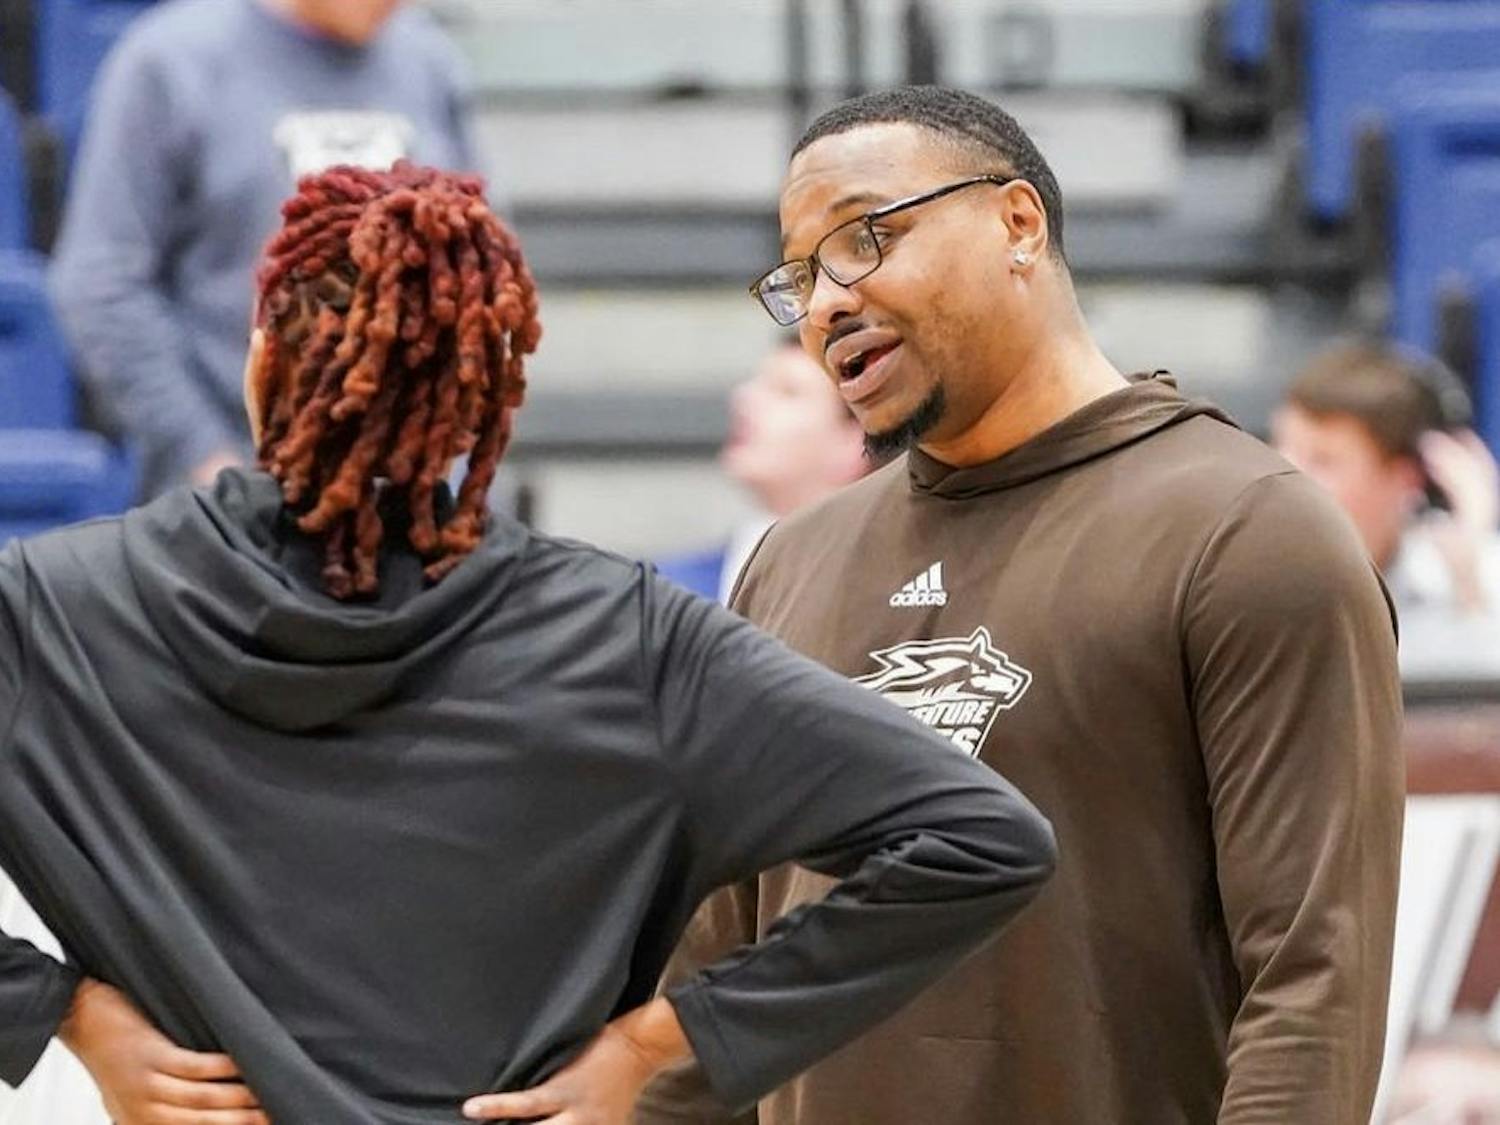 Before coming to UB, Ewing was an assistant coach for the St. Bonaventure women’s basketball team during the 2022-23 season.